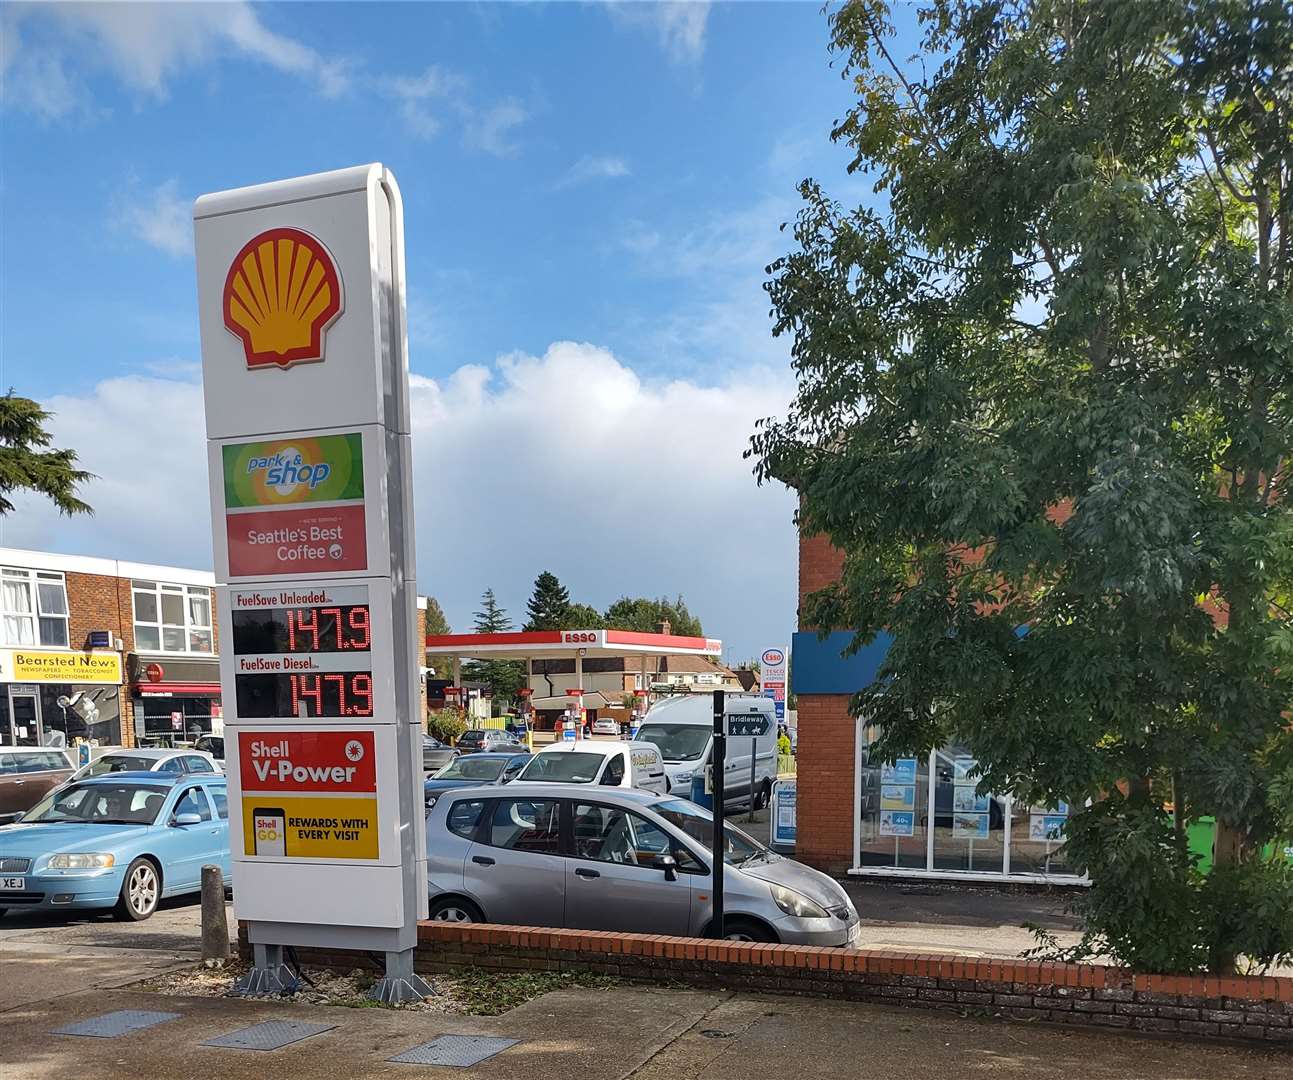 The Shell garage in Bearsted